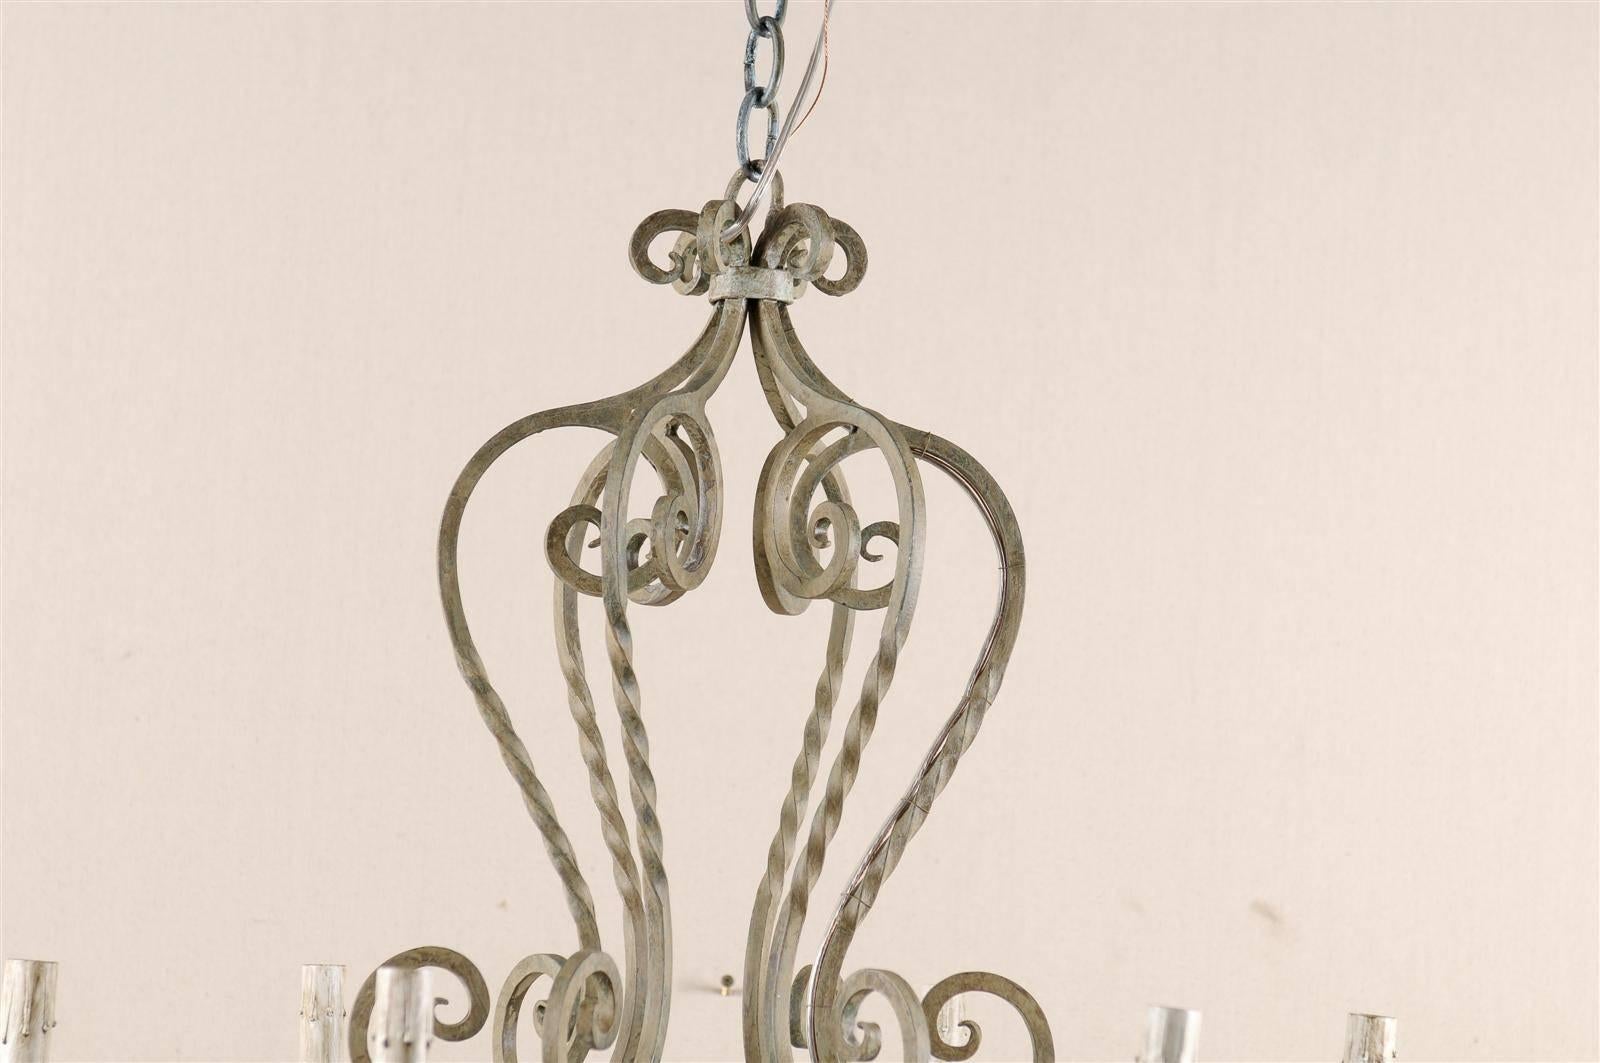 French Vintage Painted Iron 6 Light Chandelier with S-Scrolls Neutral Grey Color In Good Condition For Sale In Atlanta, GA